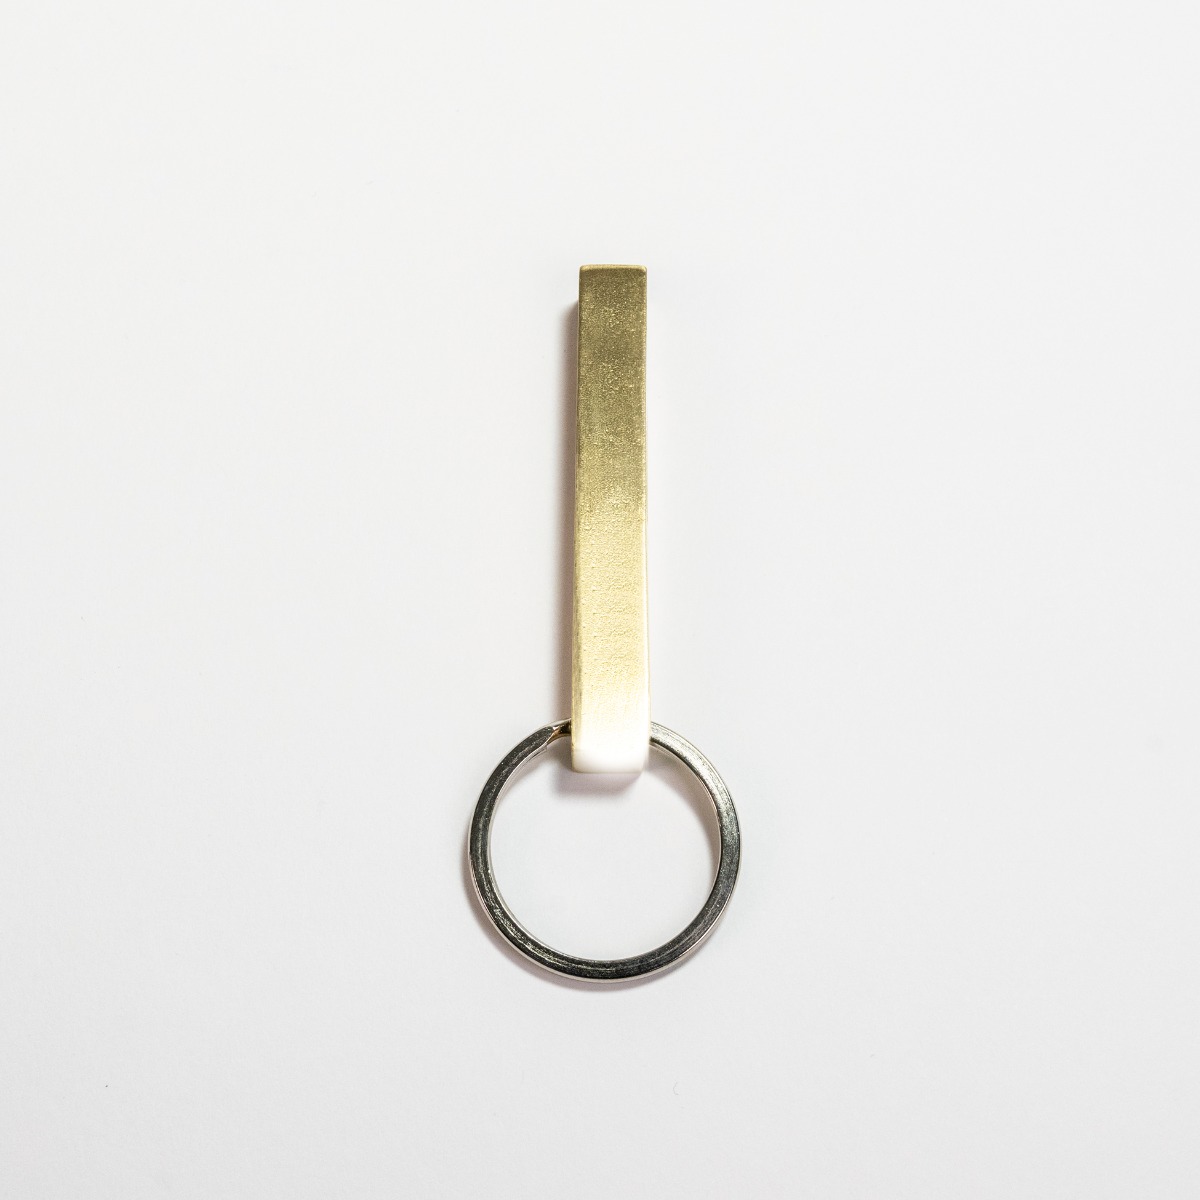 Old-style keychain